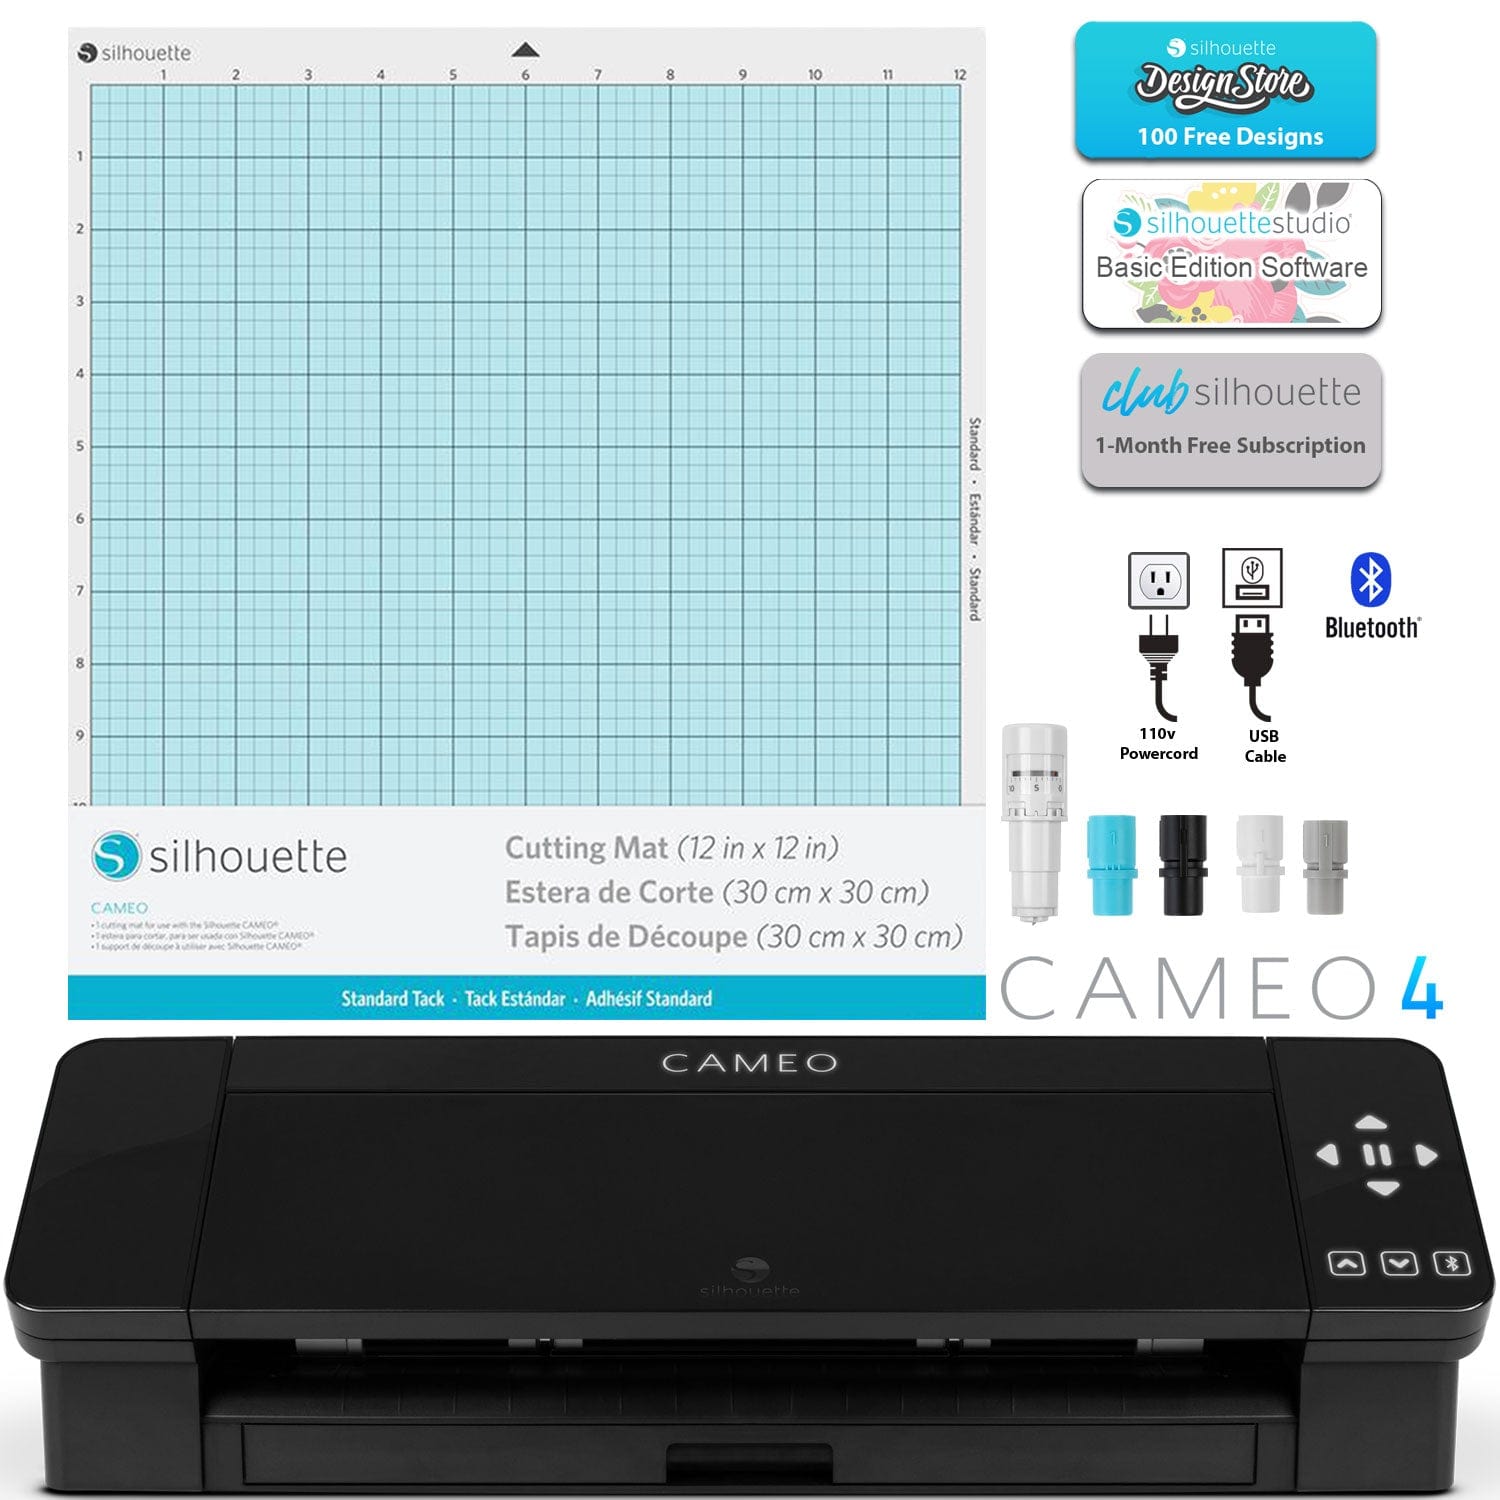 Silhouette America Craft Cutters & Embossers Silhouette Cameo 4 Black Mat N Bladed Bundle- 3 different cutting mats and 6 different blades